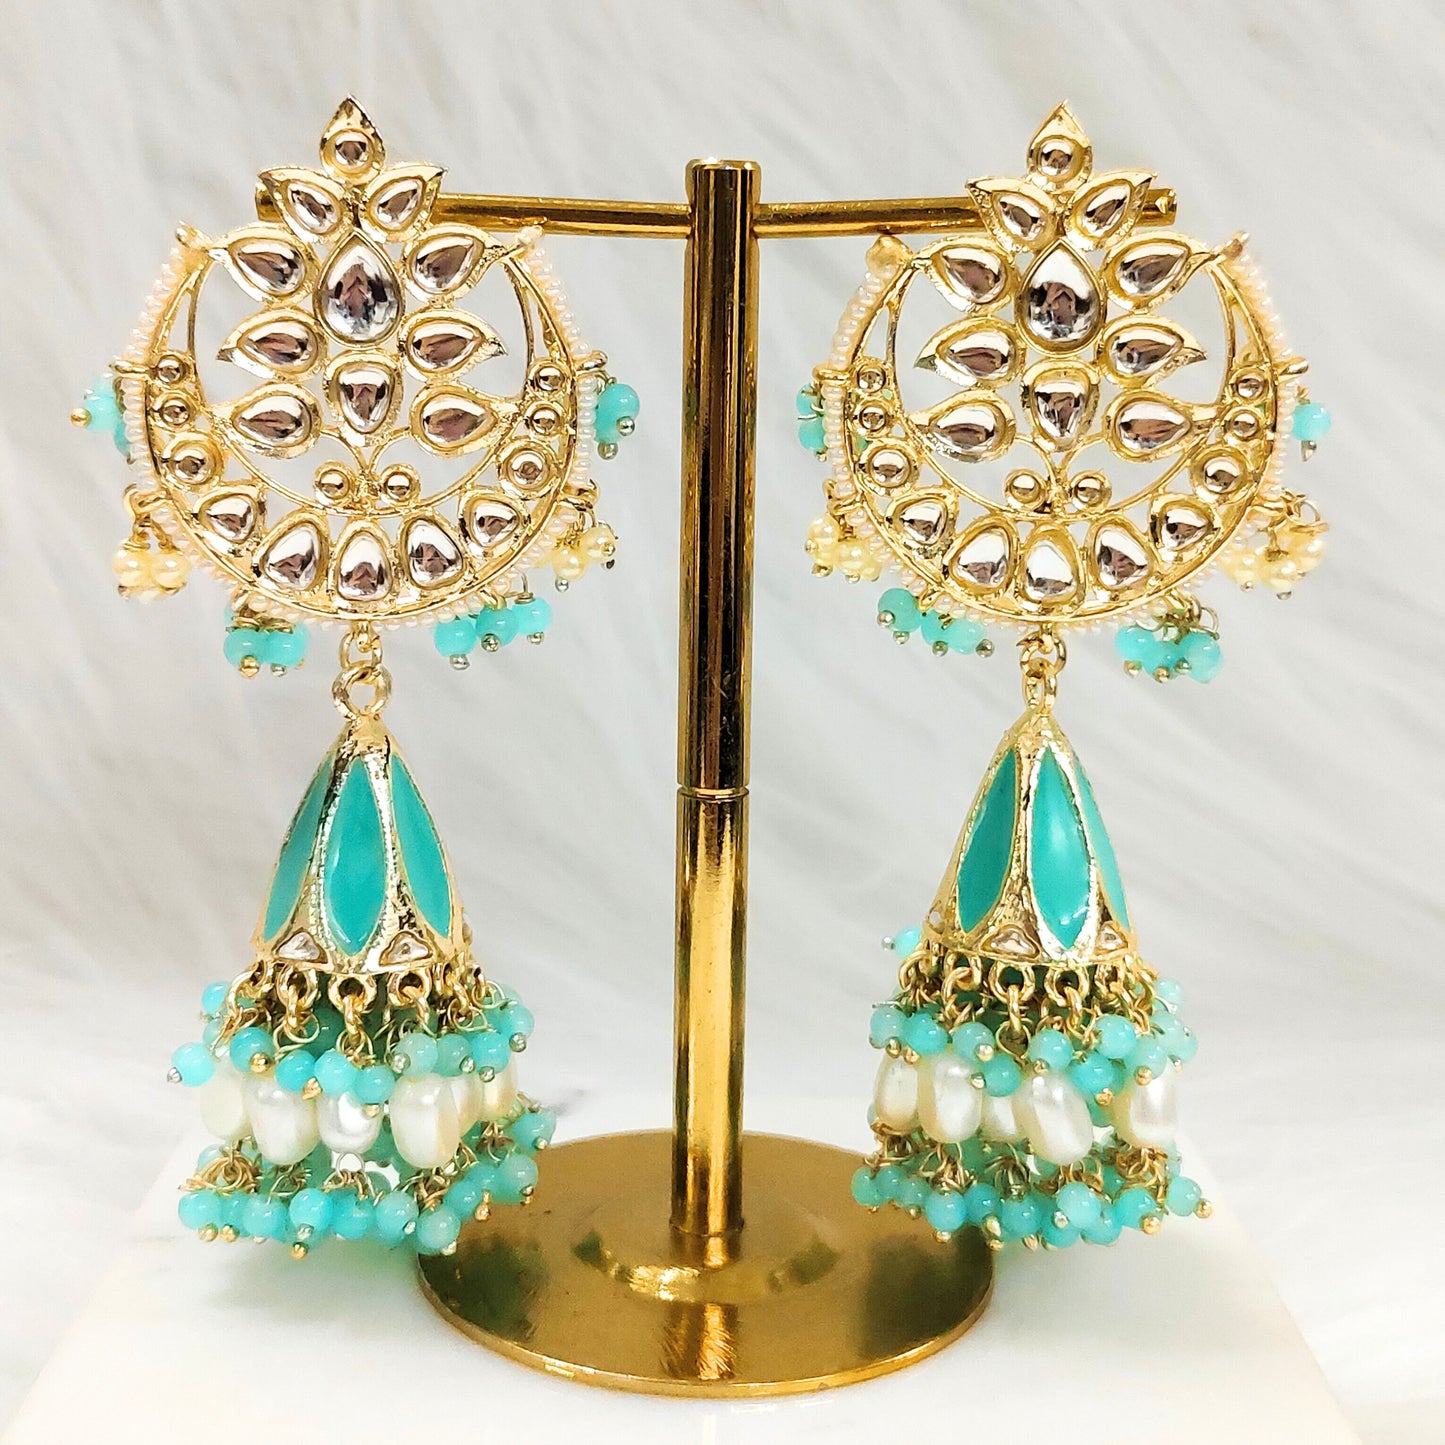 Bdiva 18K Gold Plated Turquoise Chandbali Earrings with Semi Cultured Pearls.